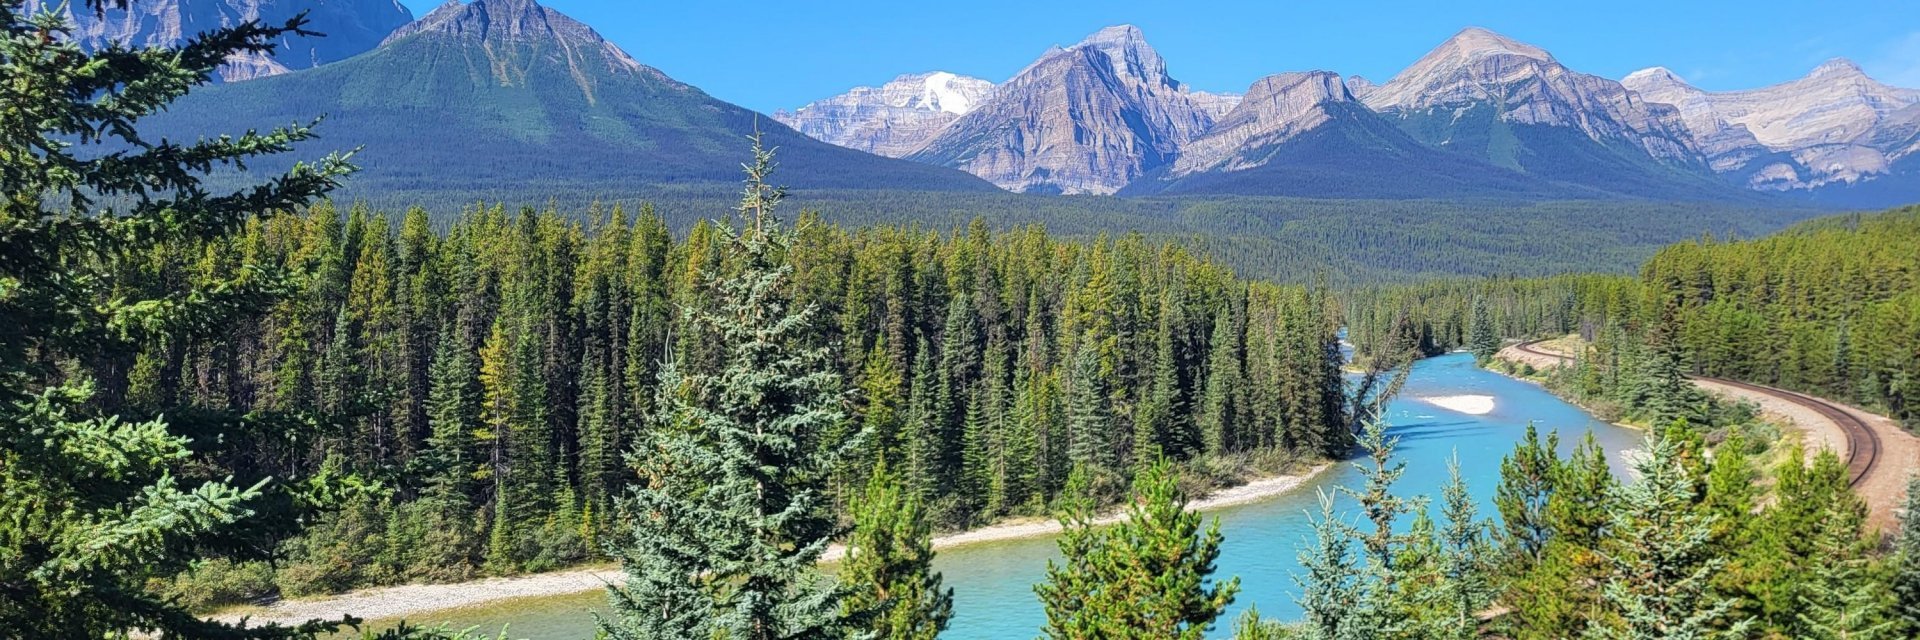 Morant's Curve, Bow River, Icefields Parkway